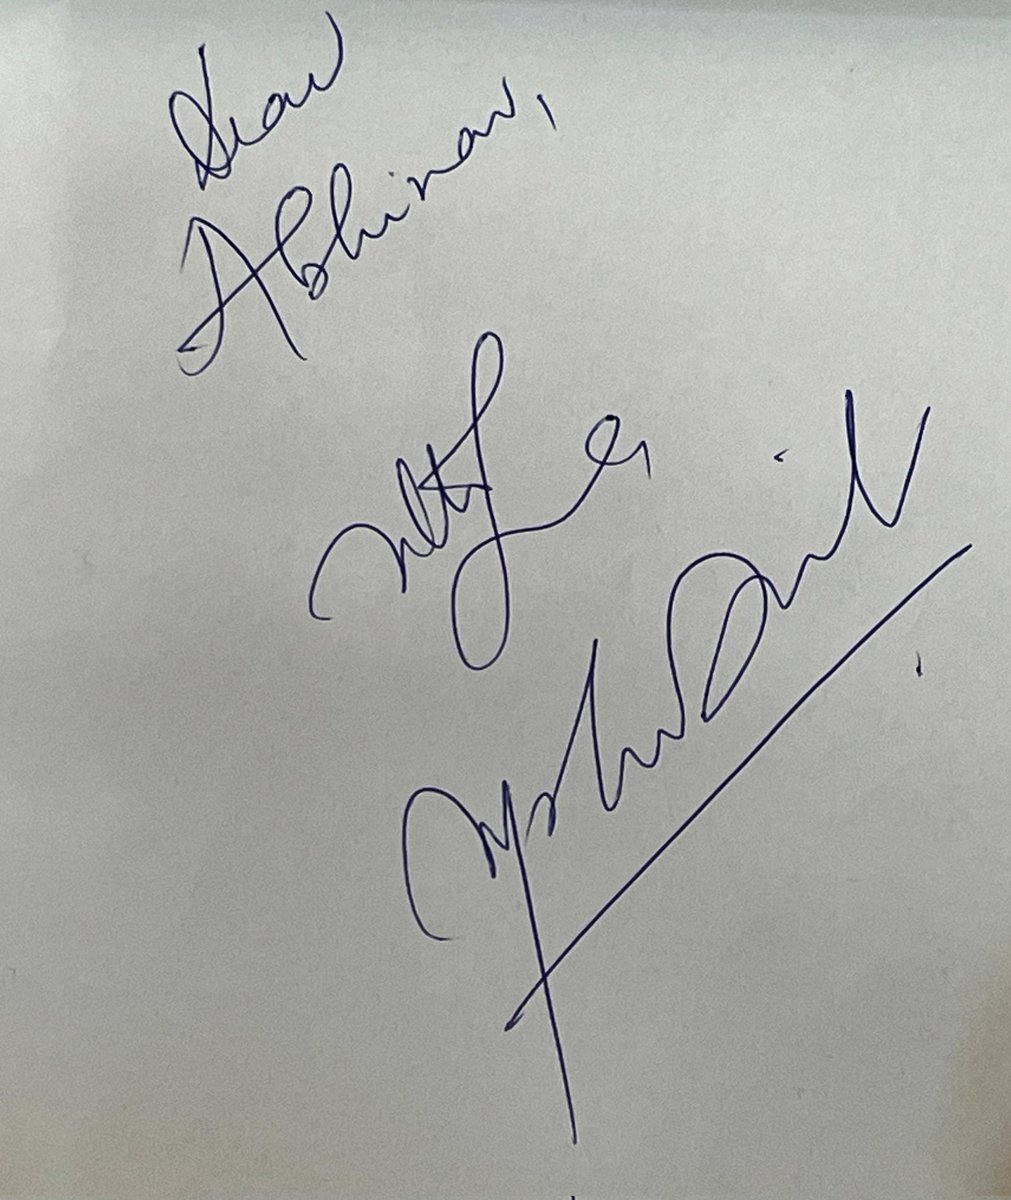 Thank you @MadhuriEmpress from the bottom of my heart for making my dream come true and to @MadhuriDixit mam, who not only sent her love back to me in a virtual meet but also penned down her heartfelt words for me to cherish forever. This is a moment I'll treasure for a lifetime.